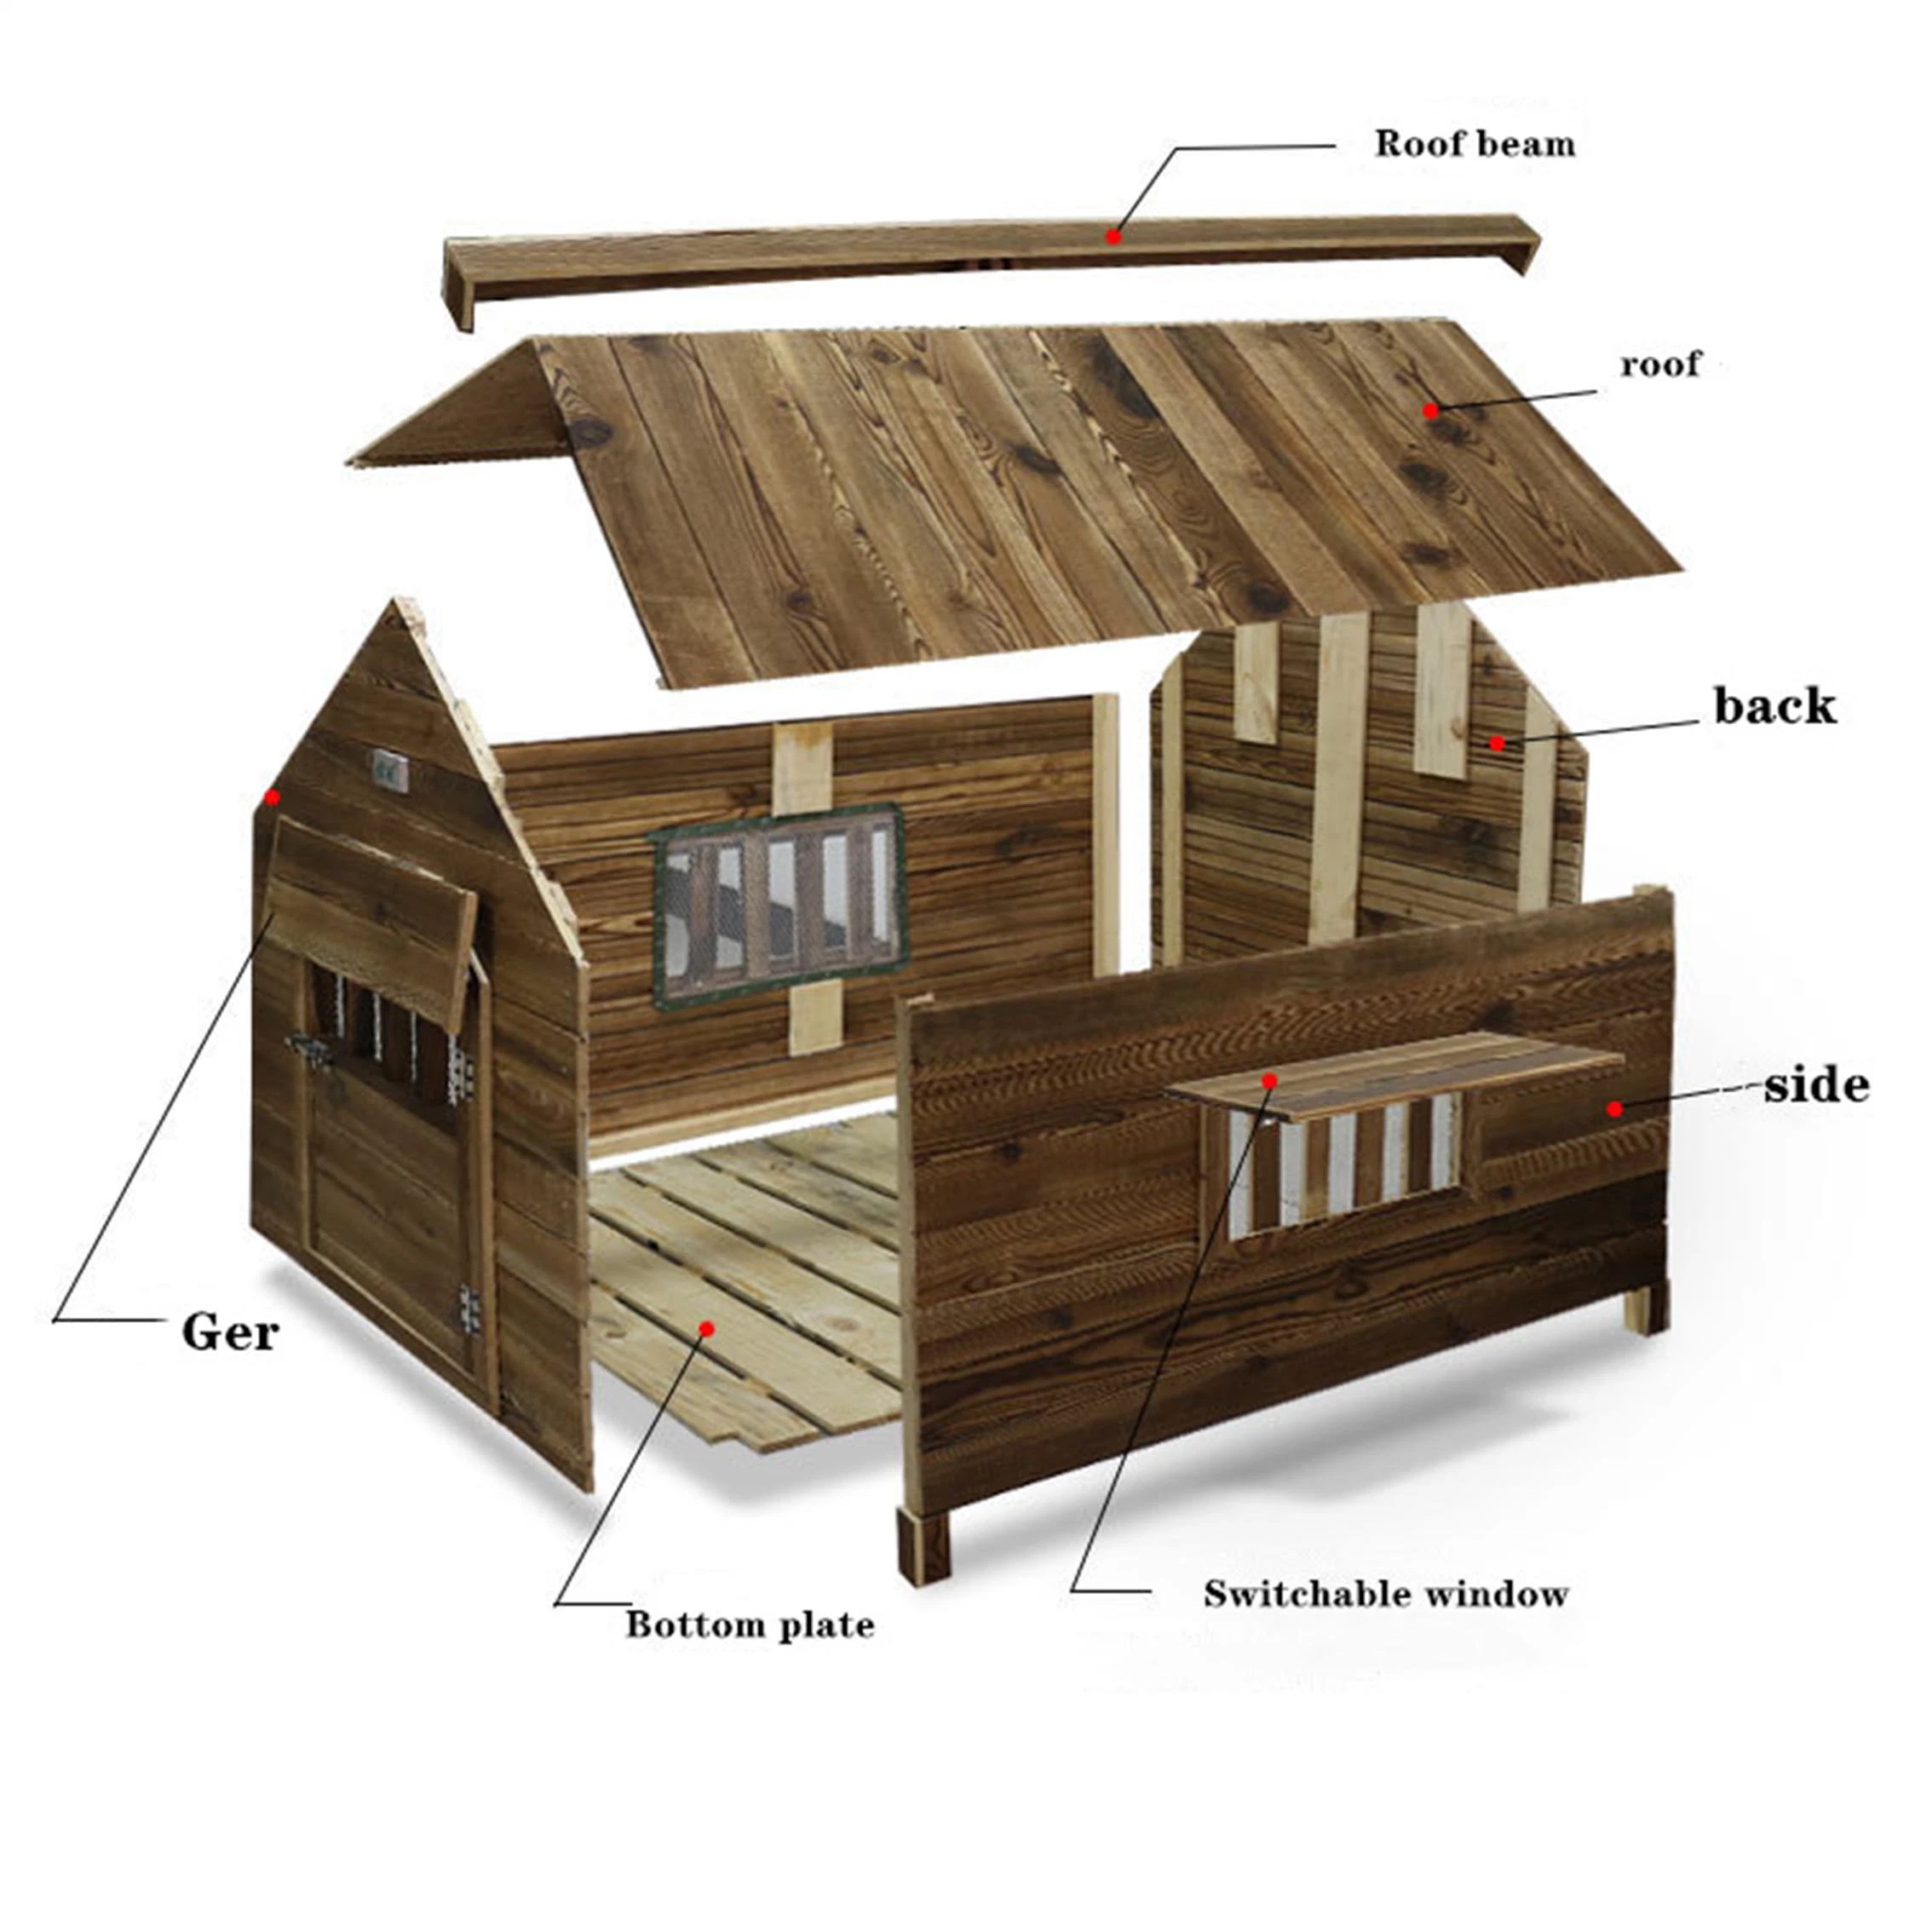 Solid Wood Warm Outdoor Indoor Carbonized Anticorrosive Rainproof Solid Wood Dog Cage Kennel Dog House Pet Villa Furniture Amaw-0127